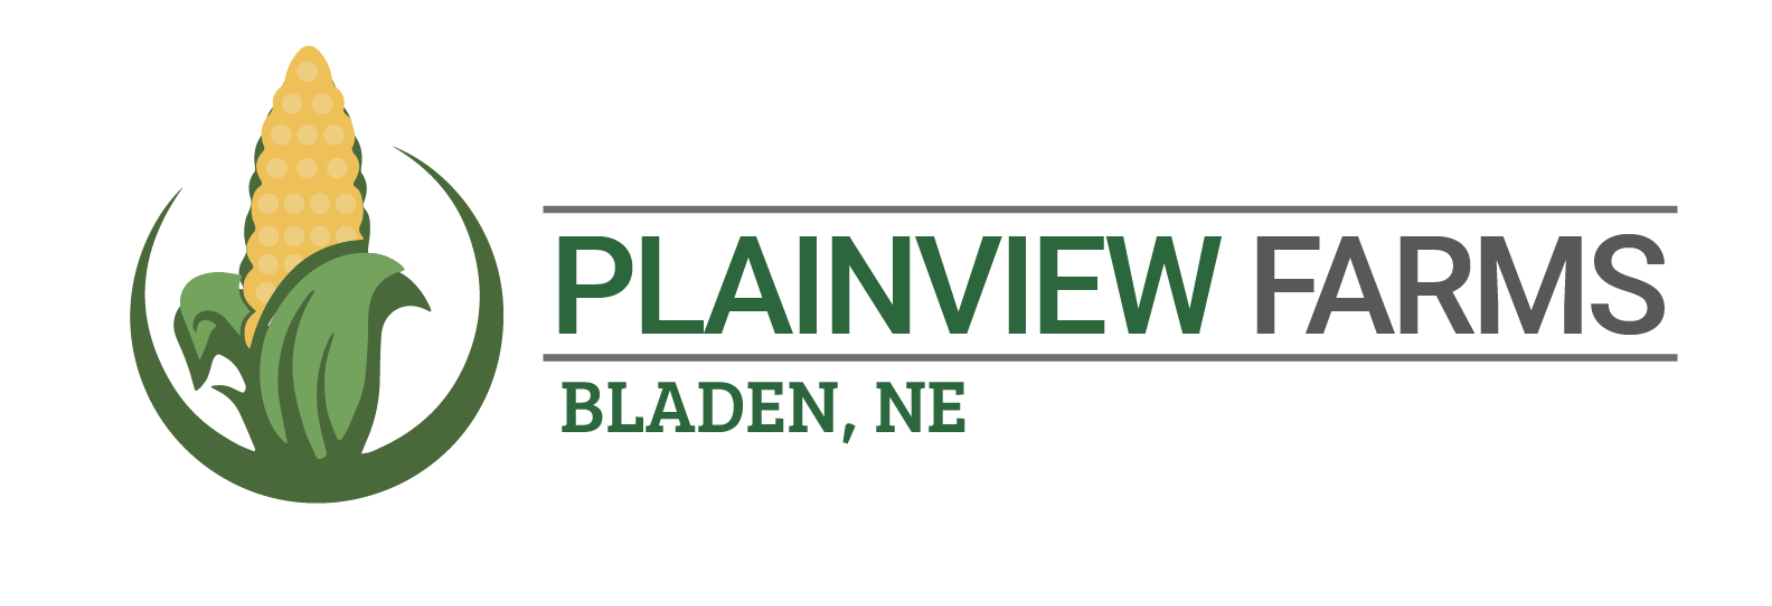 Helping Give Plainview Farms the Look They Always Wanted